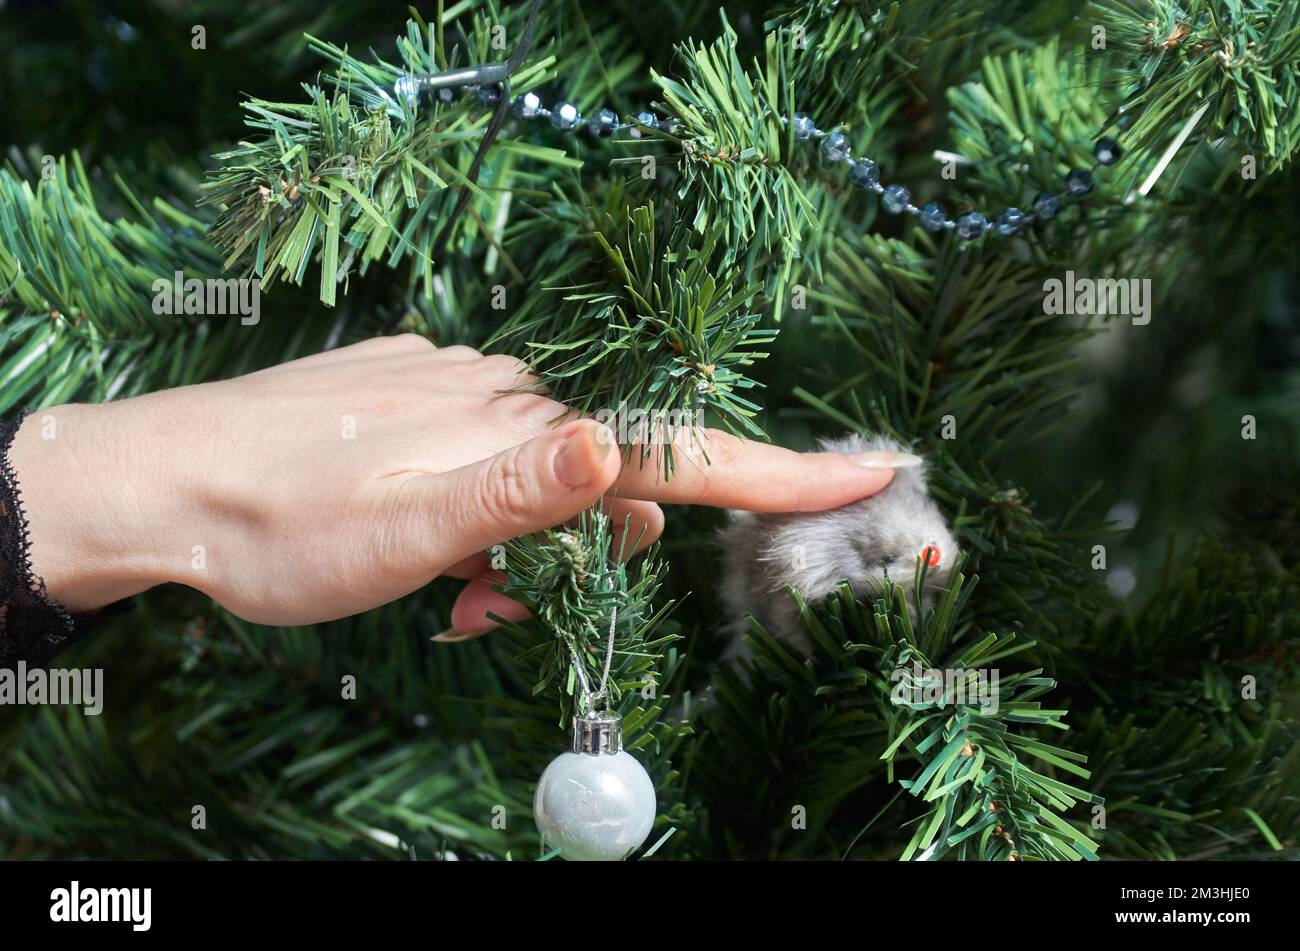 Close-up of female hands decorating a Christmas tree Stock Photo